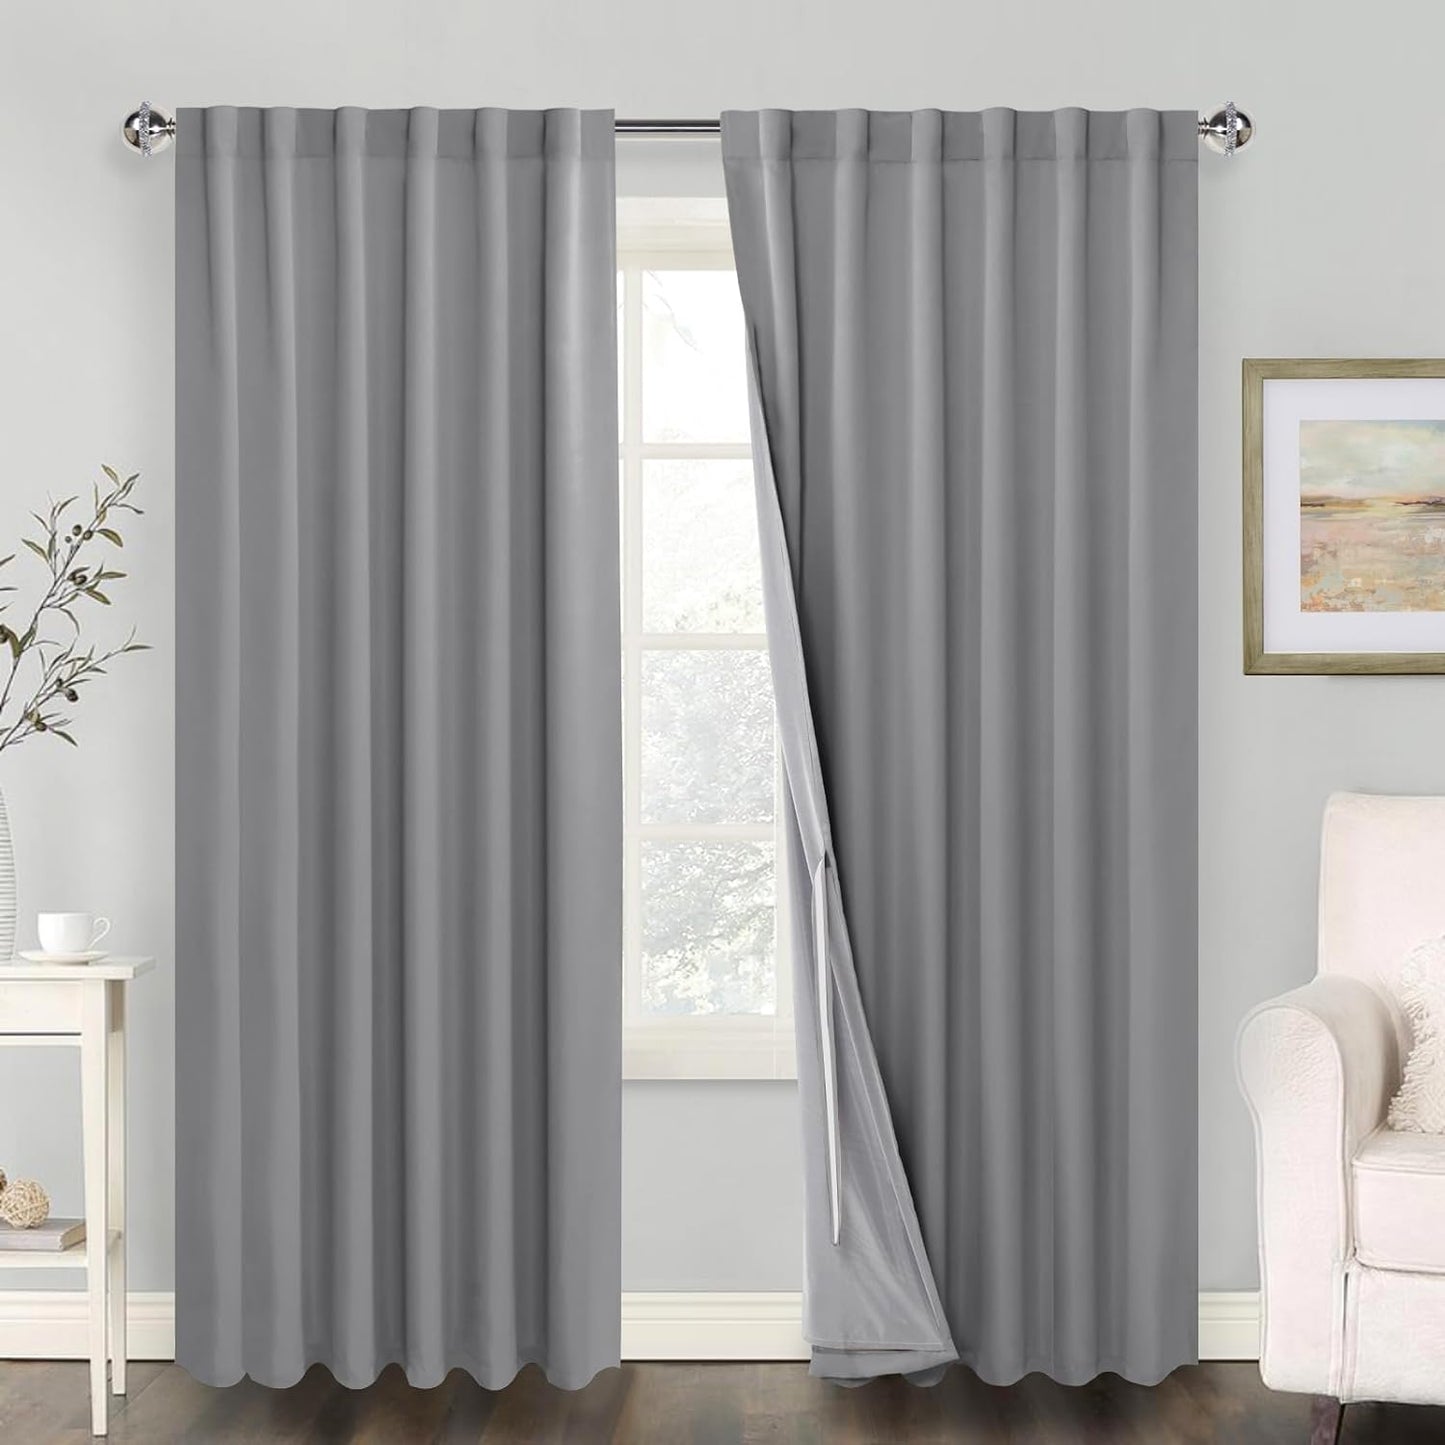 100% Blackout Curtains 2 Panels with Tiebacks- Heat and Full Light Blocking Window Treatment with Black Liner for Bedroom/Nursery, Rod Pocket & Back Tab，White, W52 X L84 Inches Long, Set of 2  XWZO Silver Grey W52" X L108"|2 Panels 